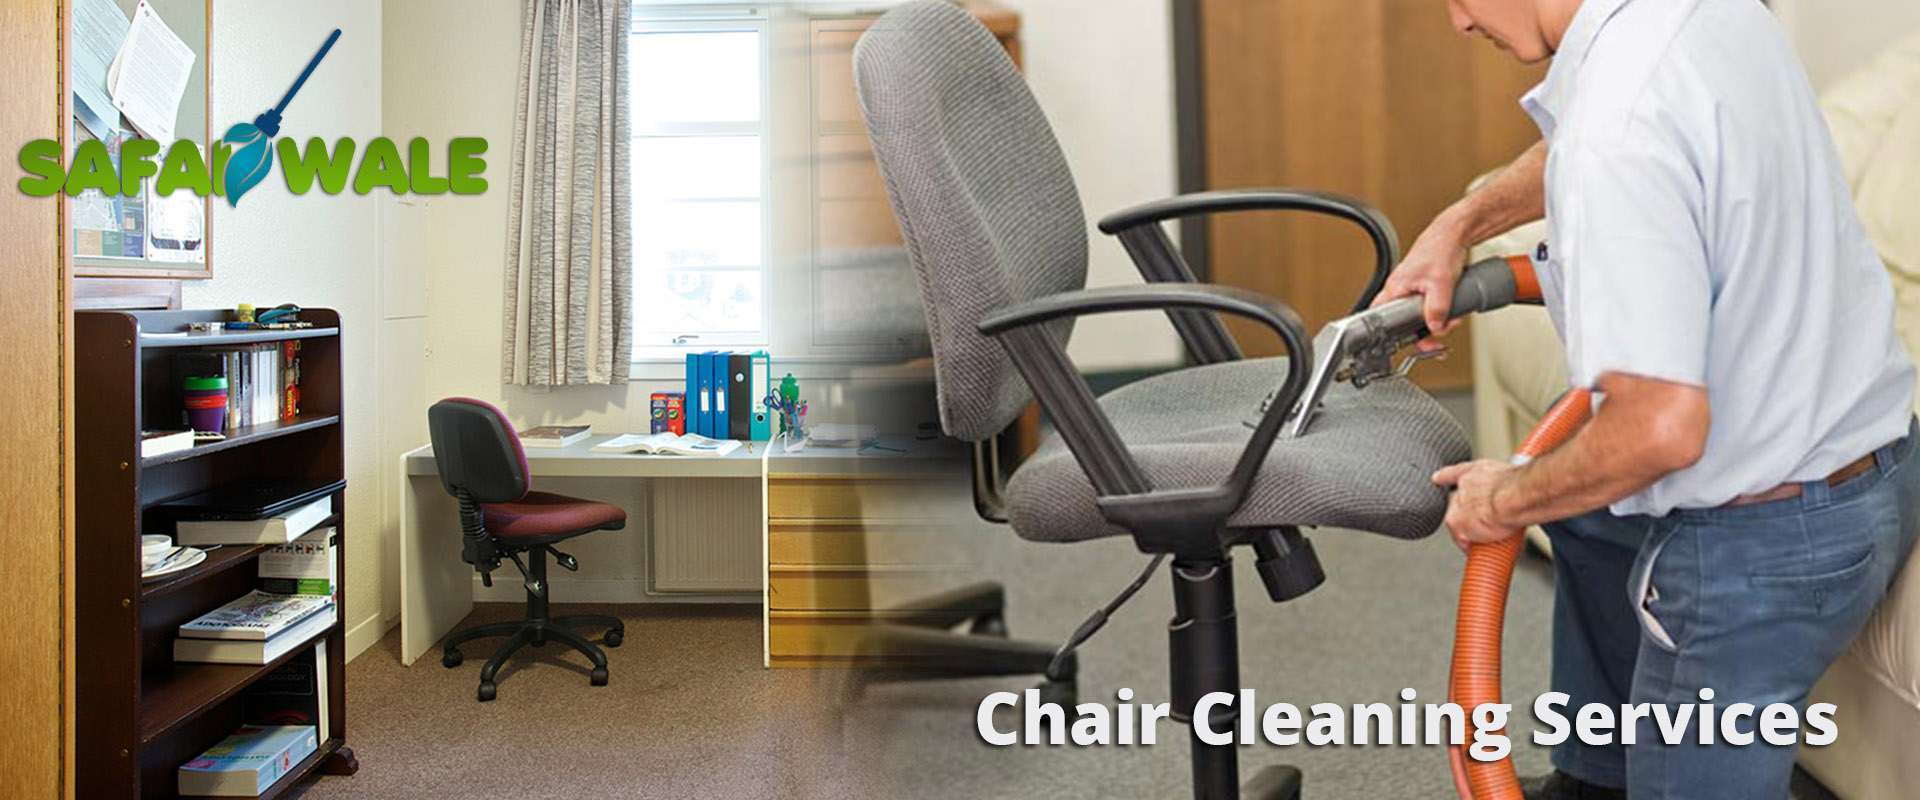 chair cleaning services